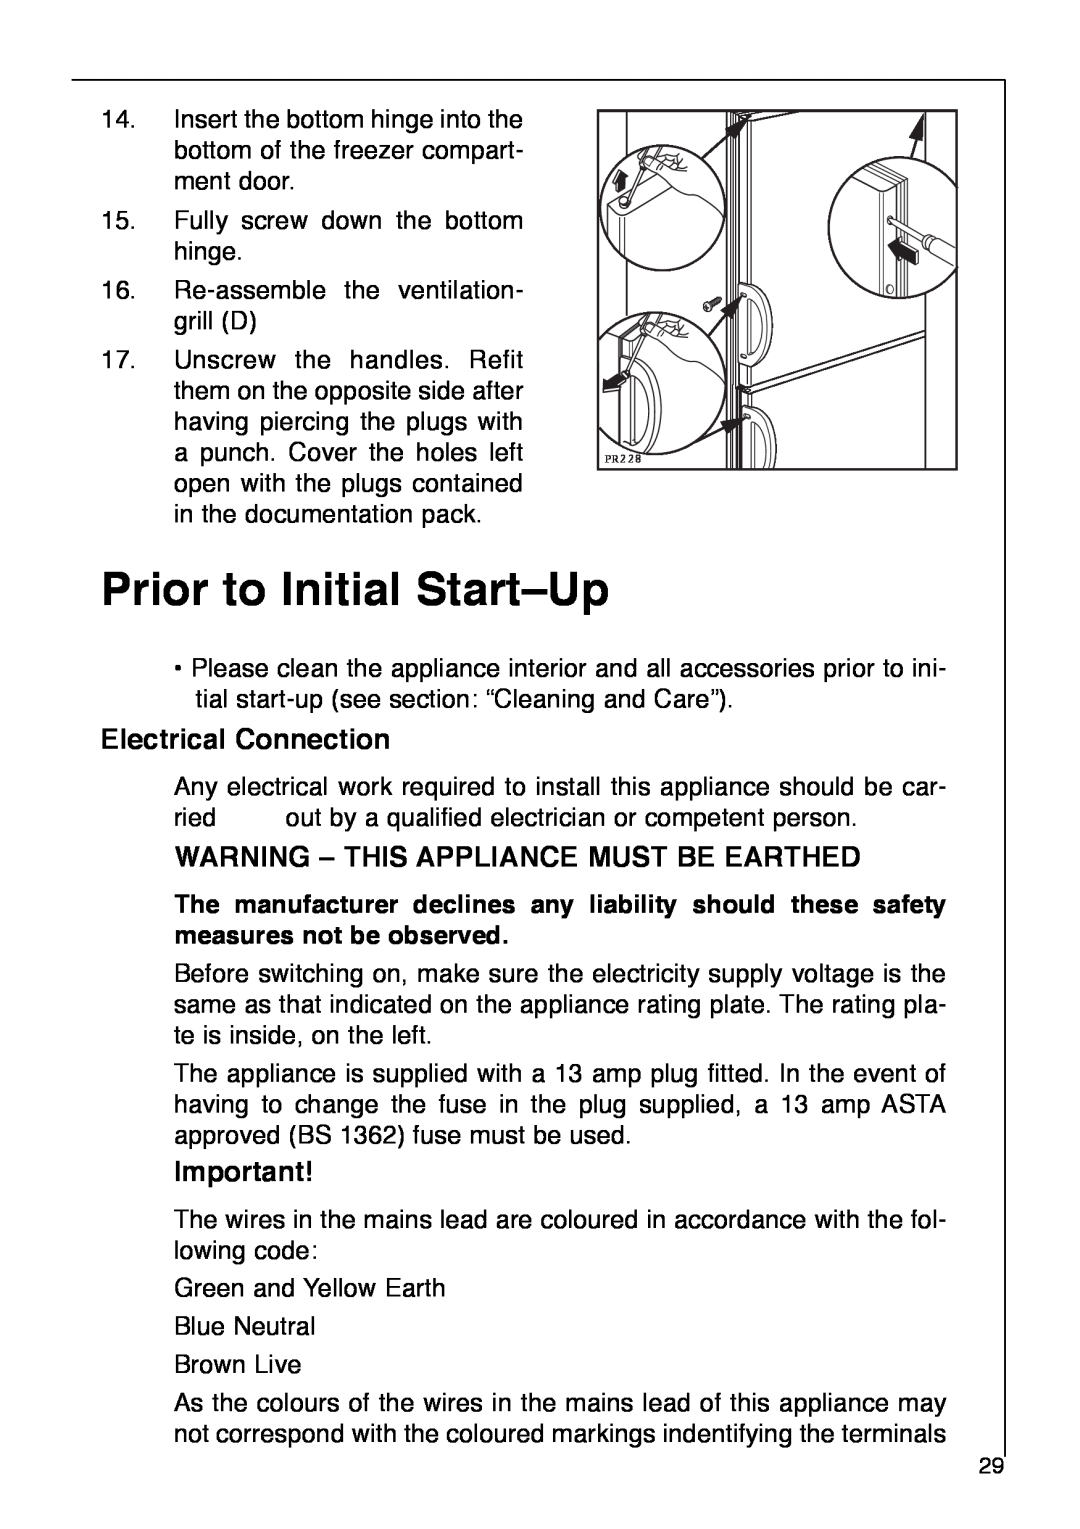 AEG 2642-6 KG manual Prior to Initial StartÐUp, Electrical Connection, Warning Ð This Appliance Must Be Earthed 